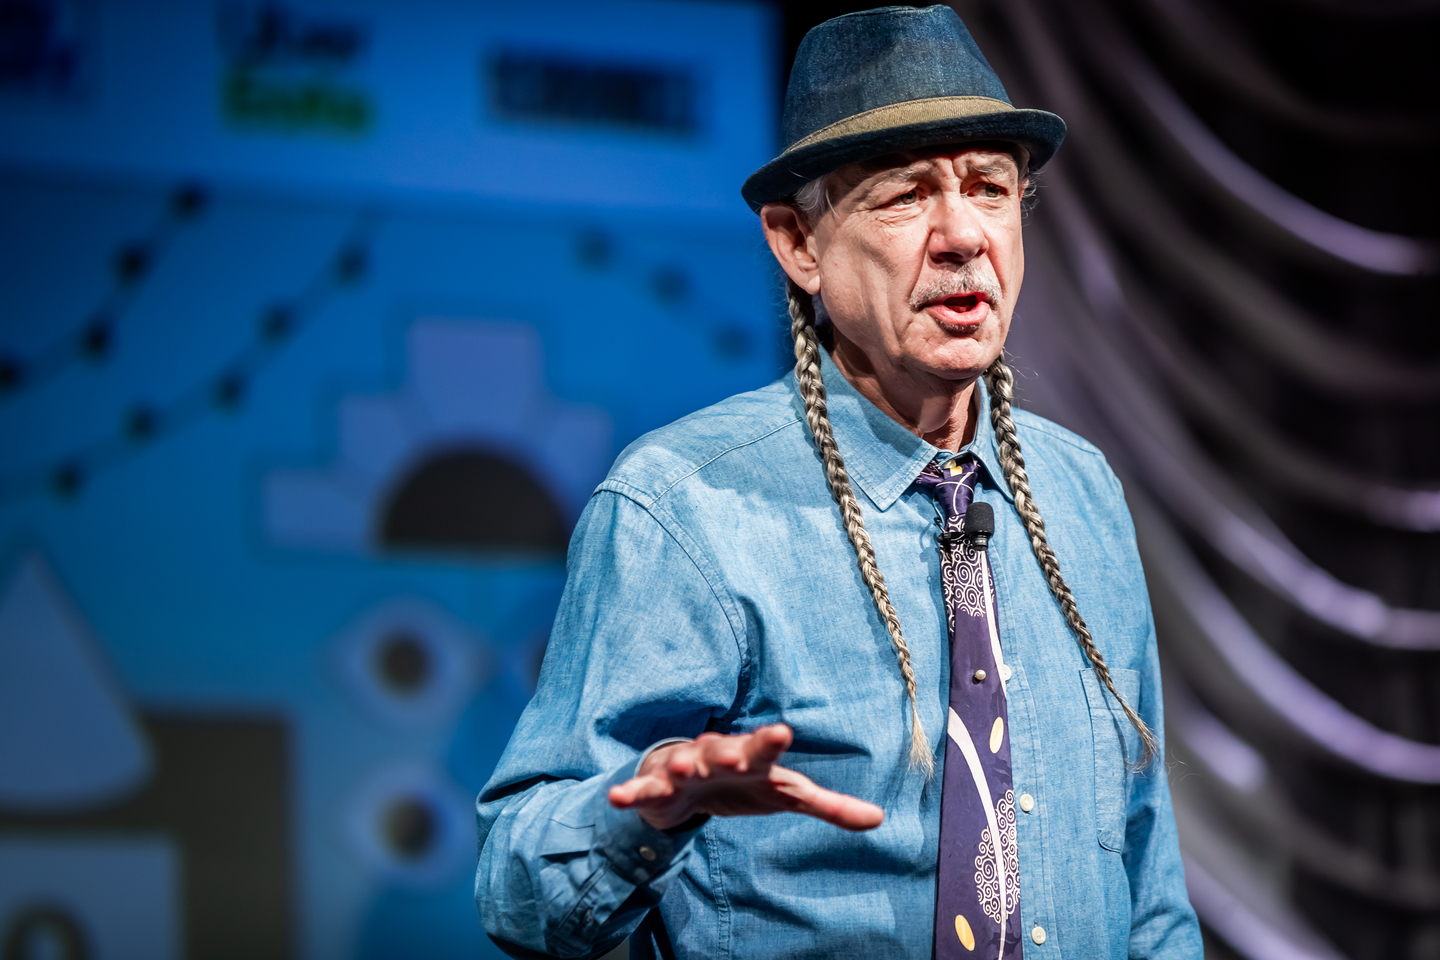 Steve DeAngelo at the The Cannabis Renaissance: Science Validates Tradition Featured Session – Photo by Aaron Rogosin